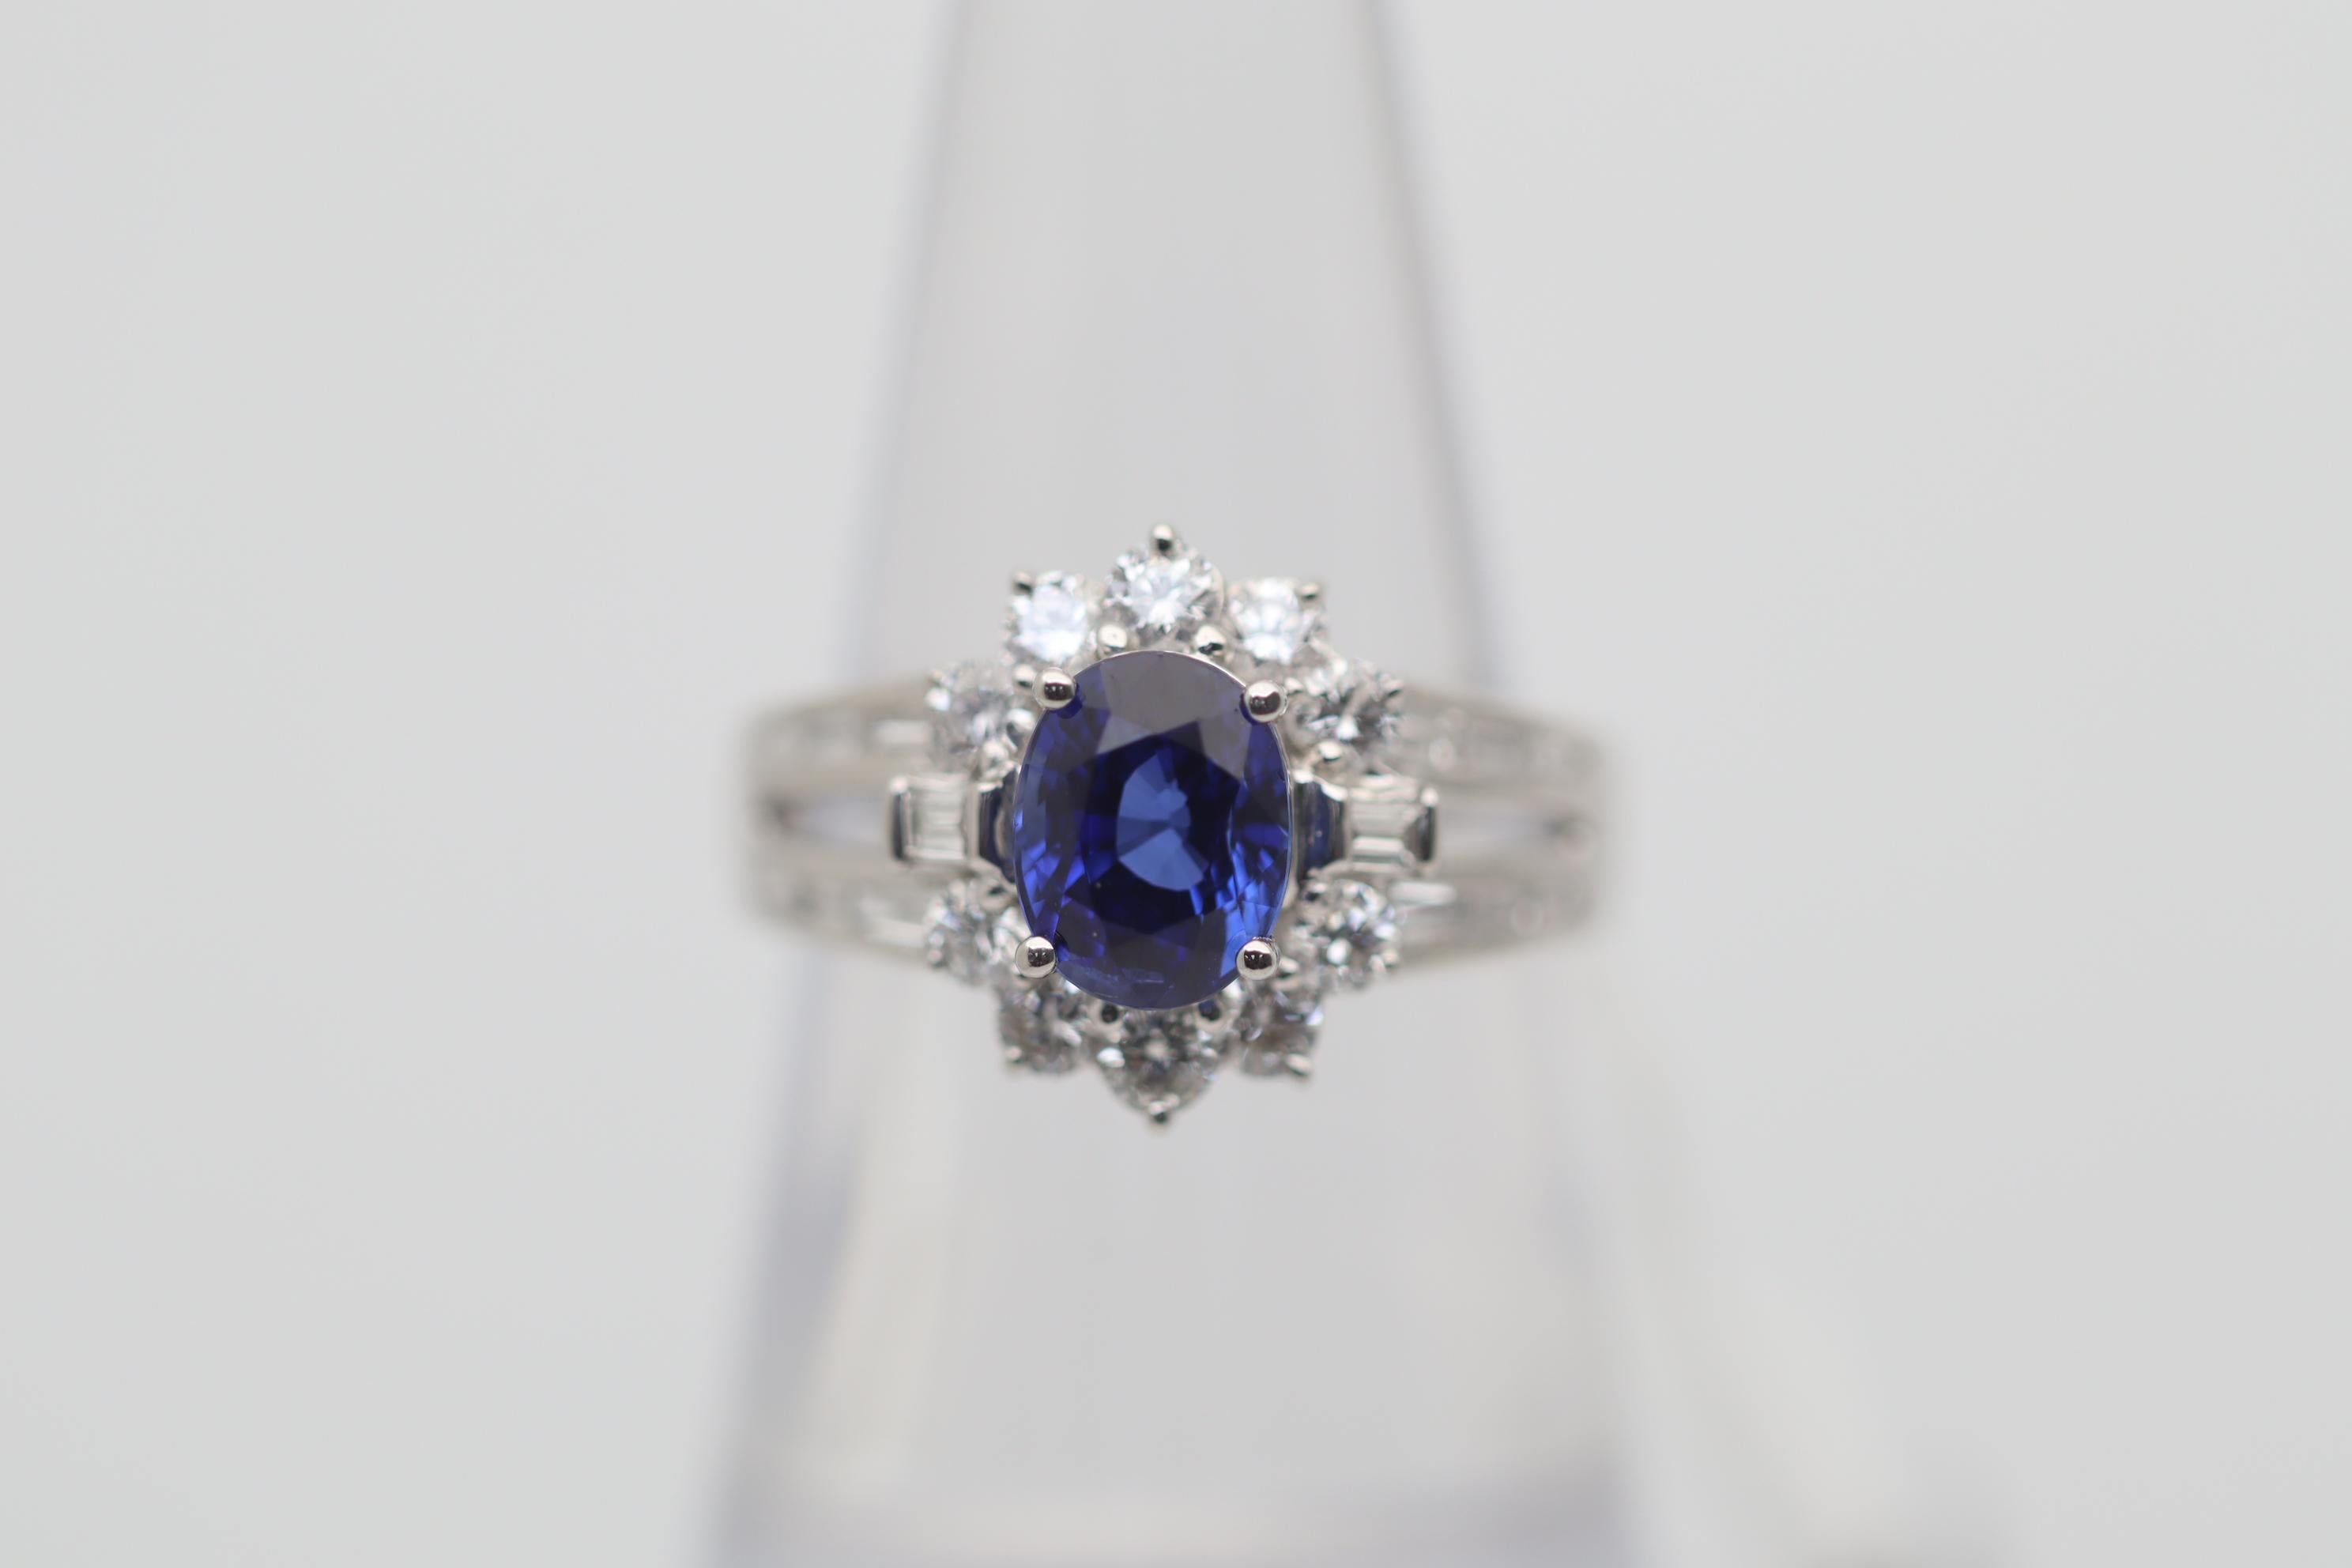 A superb gem blue sapphire of extra fine quality takes center stage of this platinum made ring. The sapphire weighs 2.00 carats and has the perfect blue color, which is rich, bright and shiny, one of the finest we have seen. It is complemented by